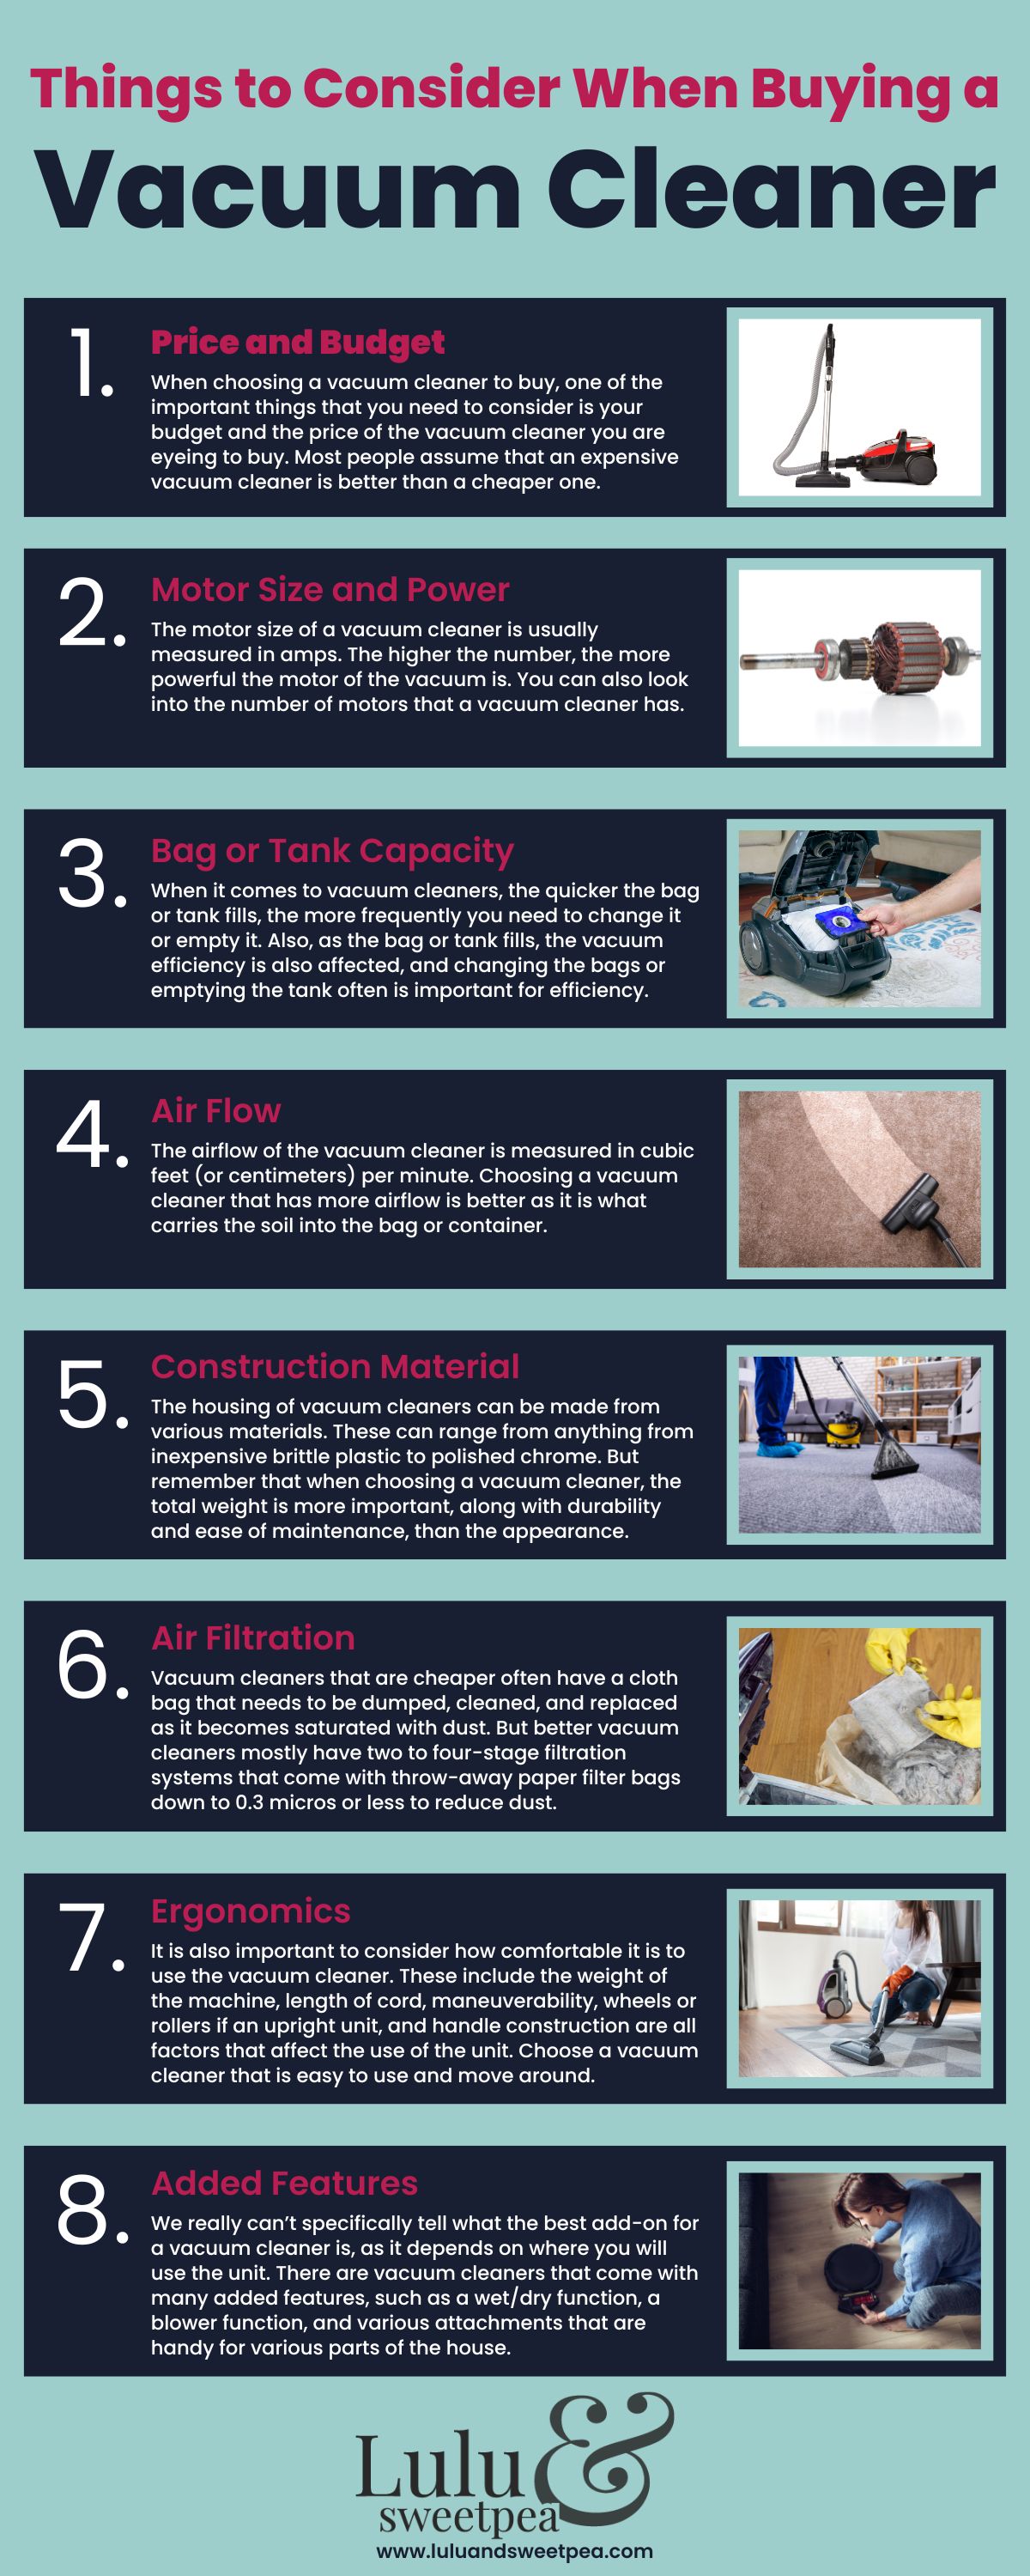 Things to Consider When Buying a Vacuum Cleaner